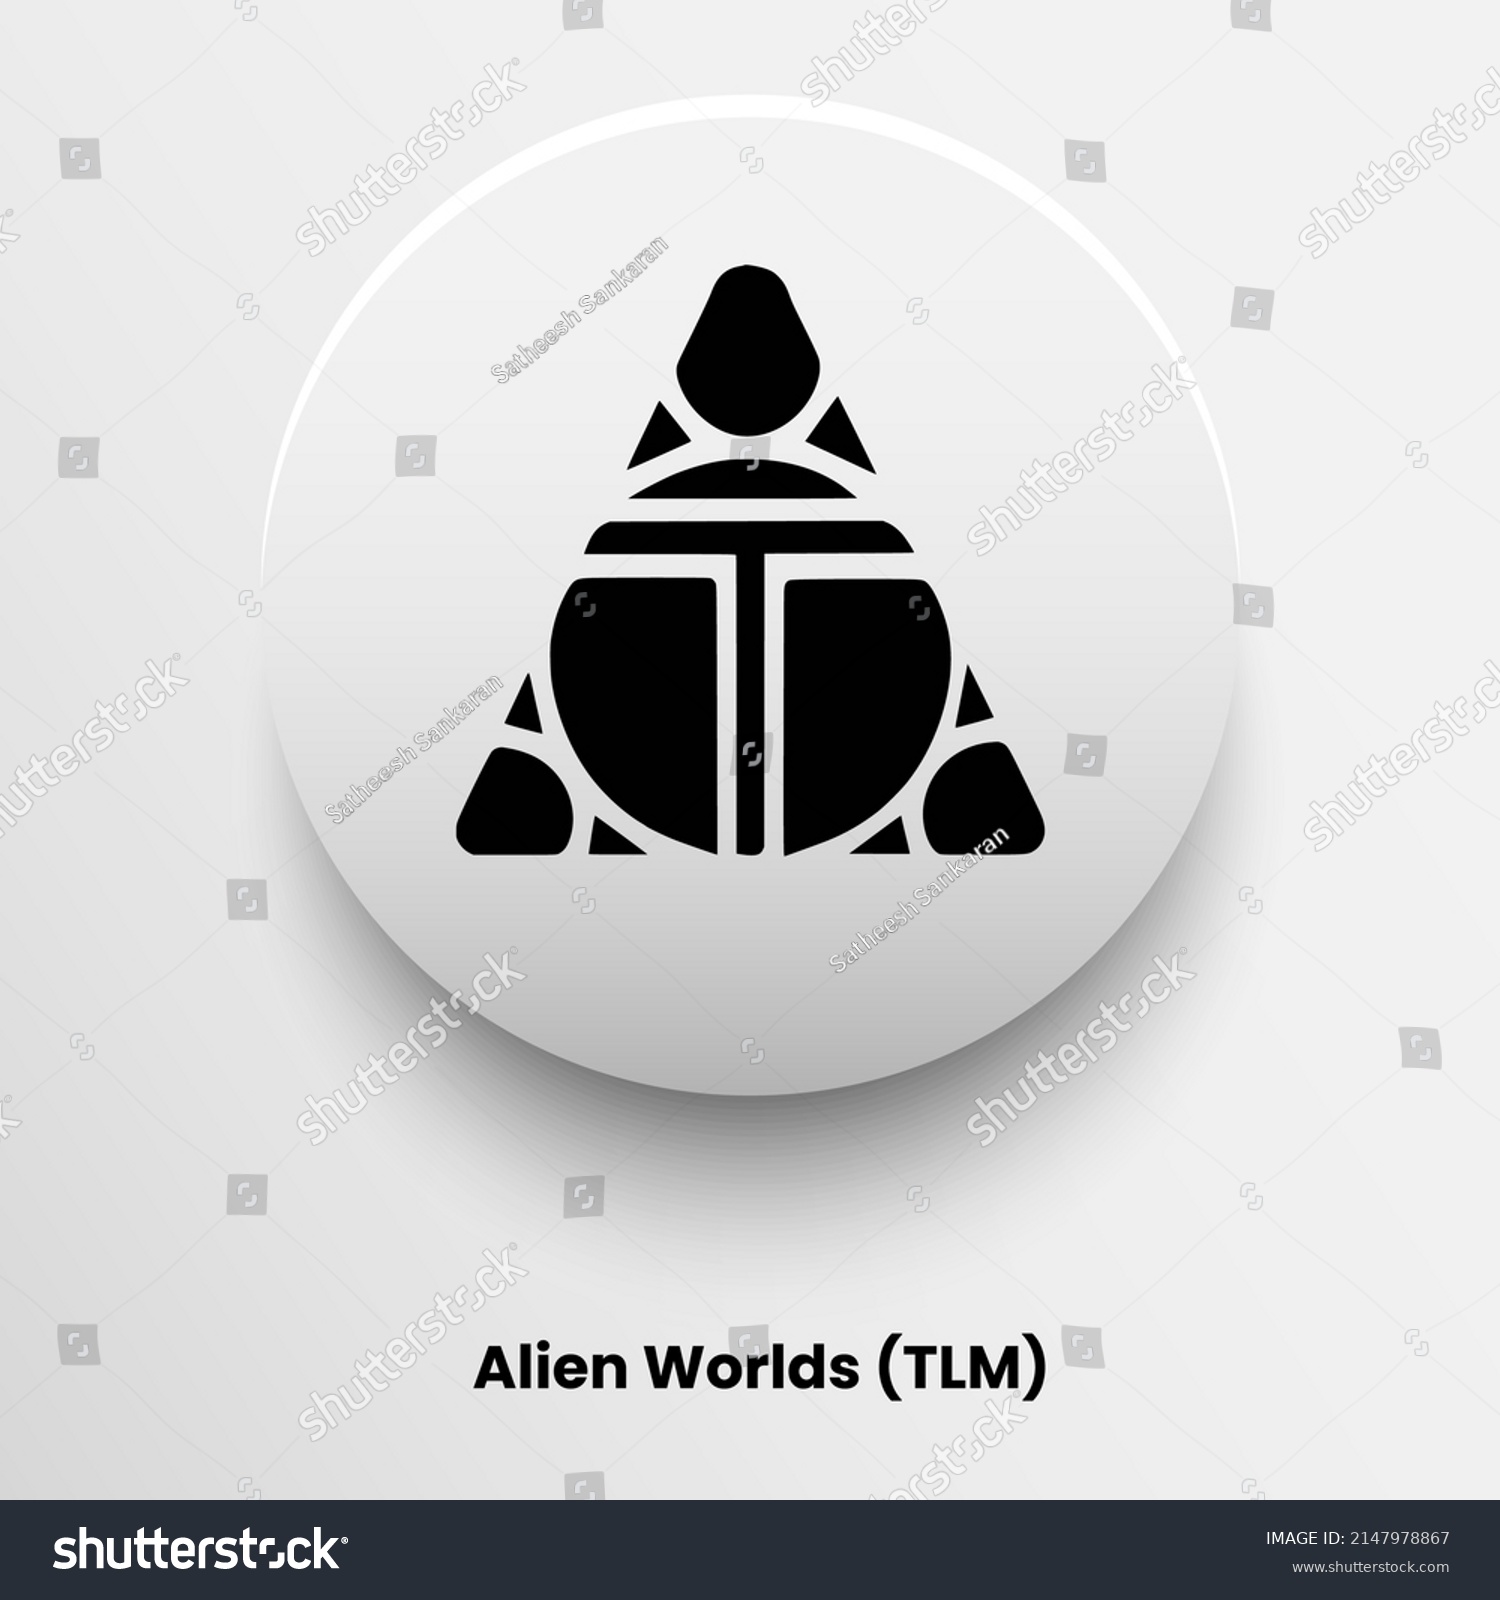 SVG of Blockchain based secure Cryptocurrency coin Alien Worlds (TLM) icon isolated on colored background. Digital virtual money tokens. Decentralized finance technology illustration. Altcoin Vector logos. svg